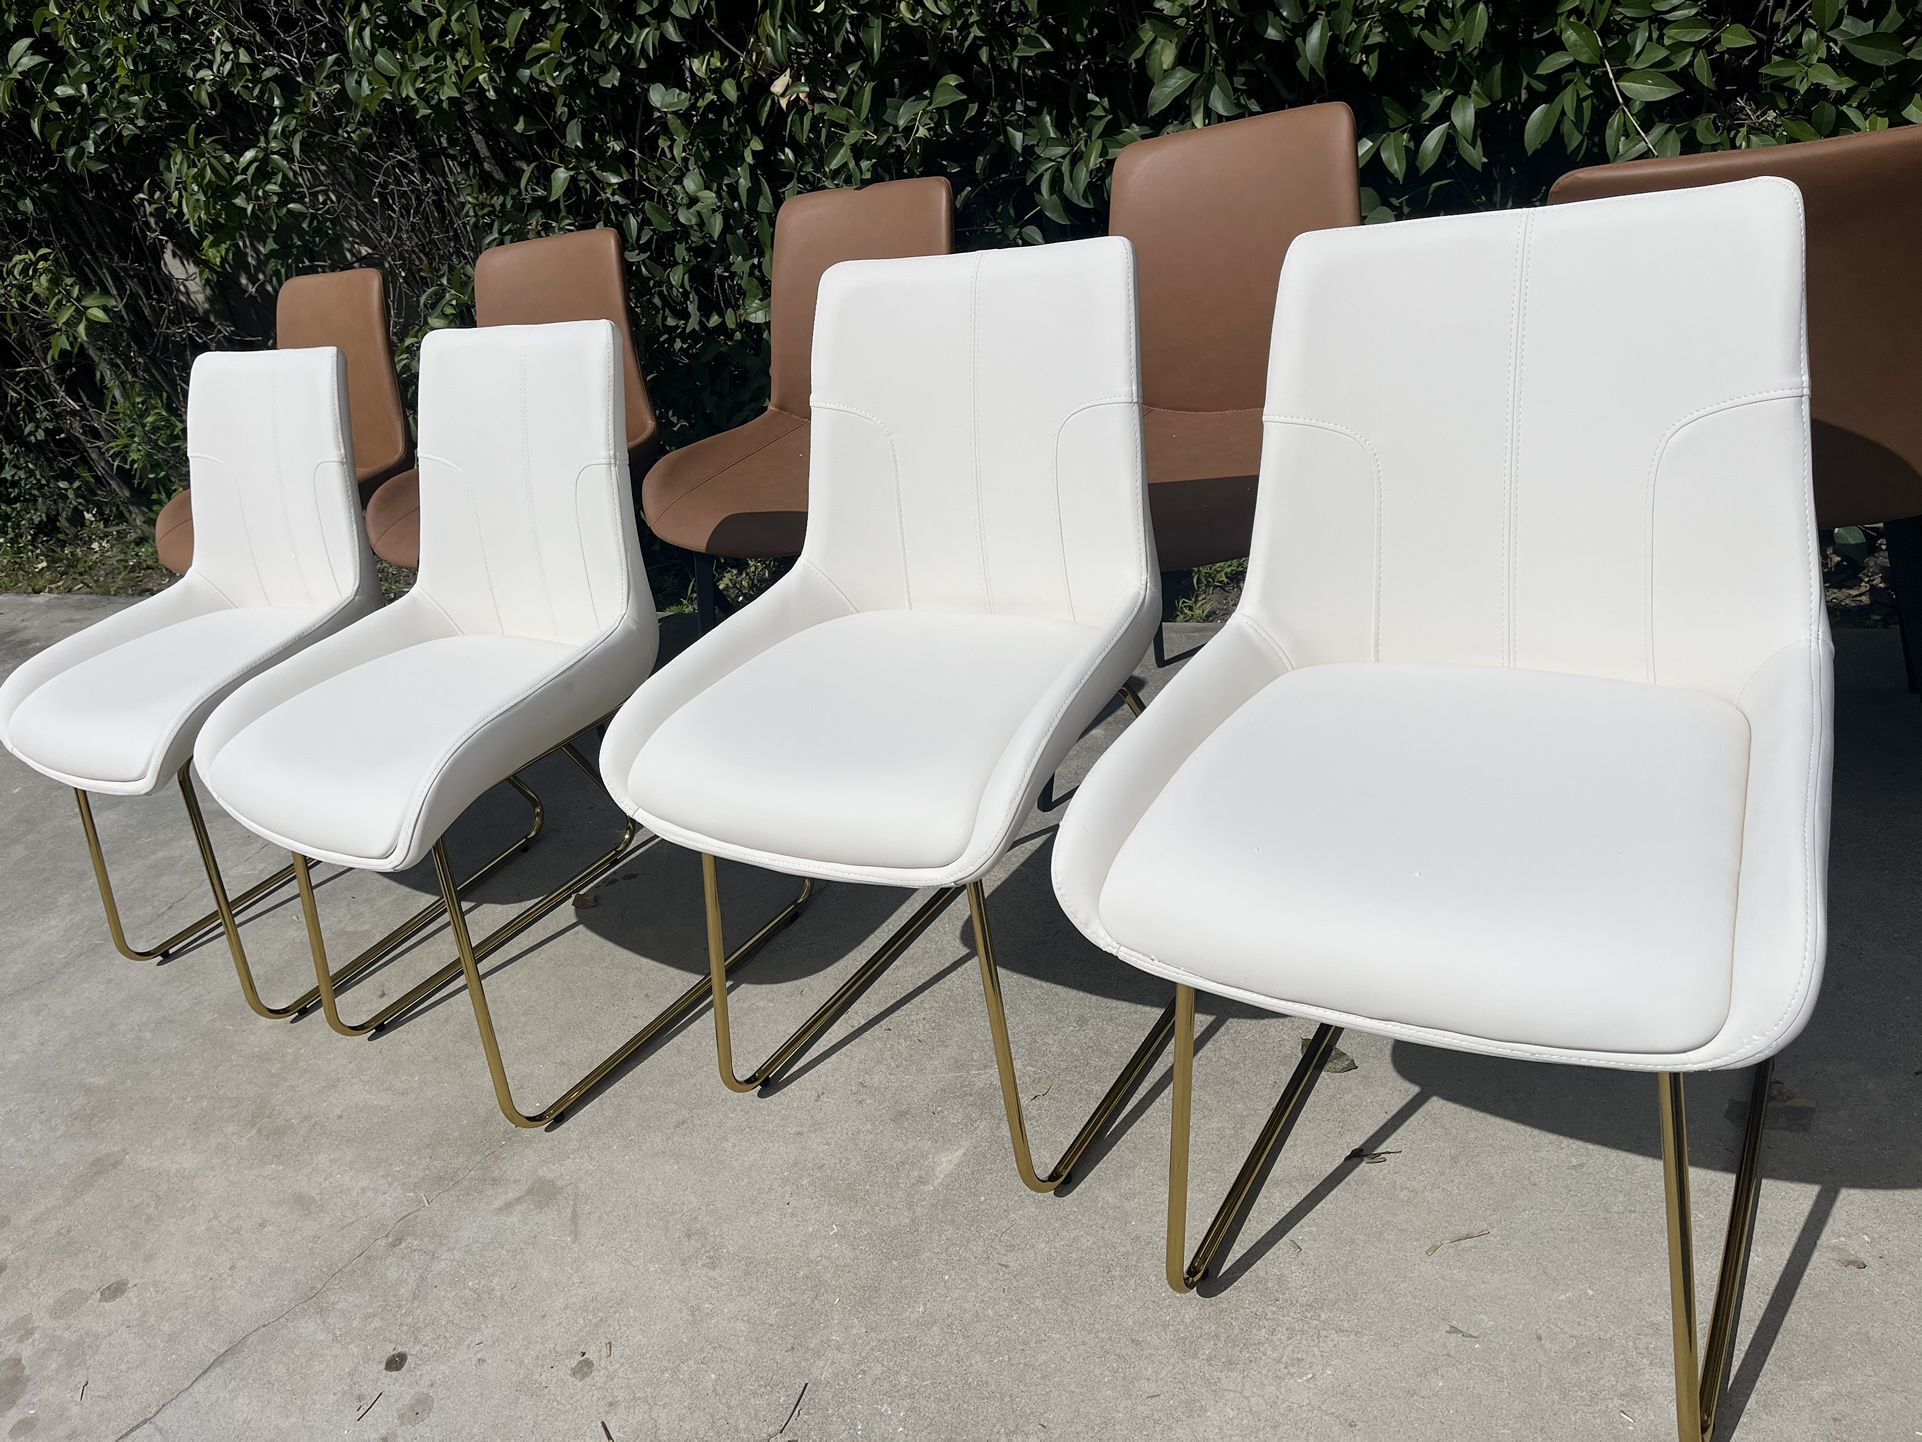 Set of 5 Faux Leather Dining Chairs, Modern Kitchen Chairs Waterproof Dining Room Chair with Gold Metal Frame Side Chairs for Living Room Reception Re